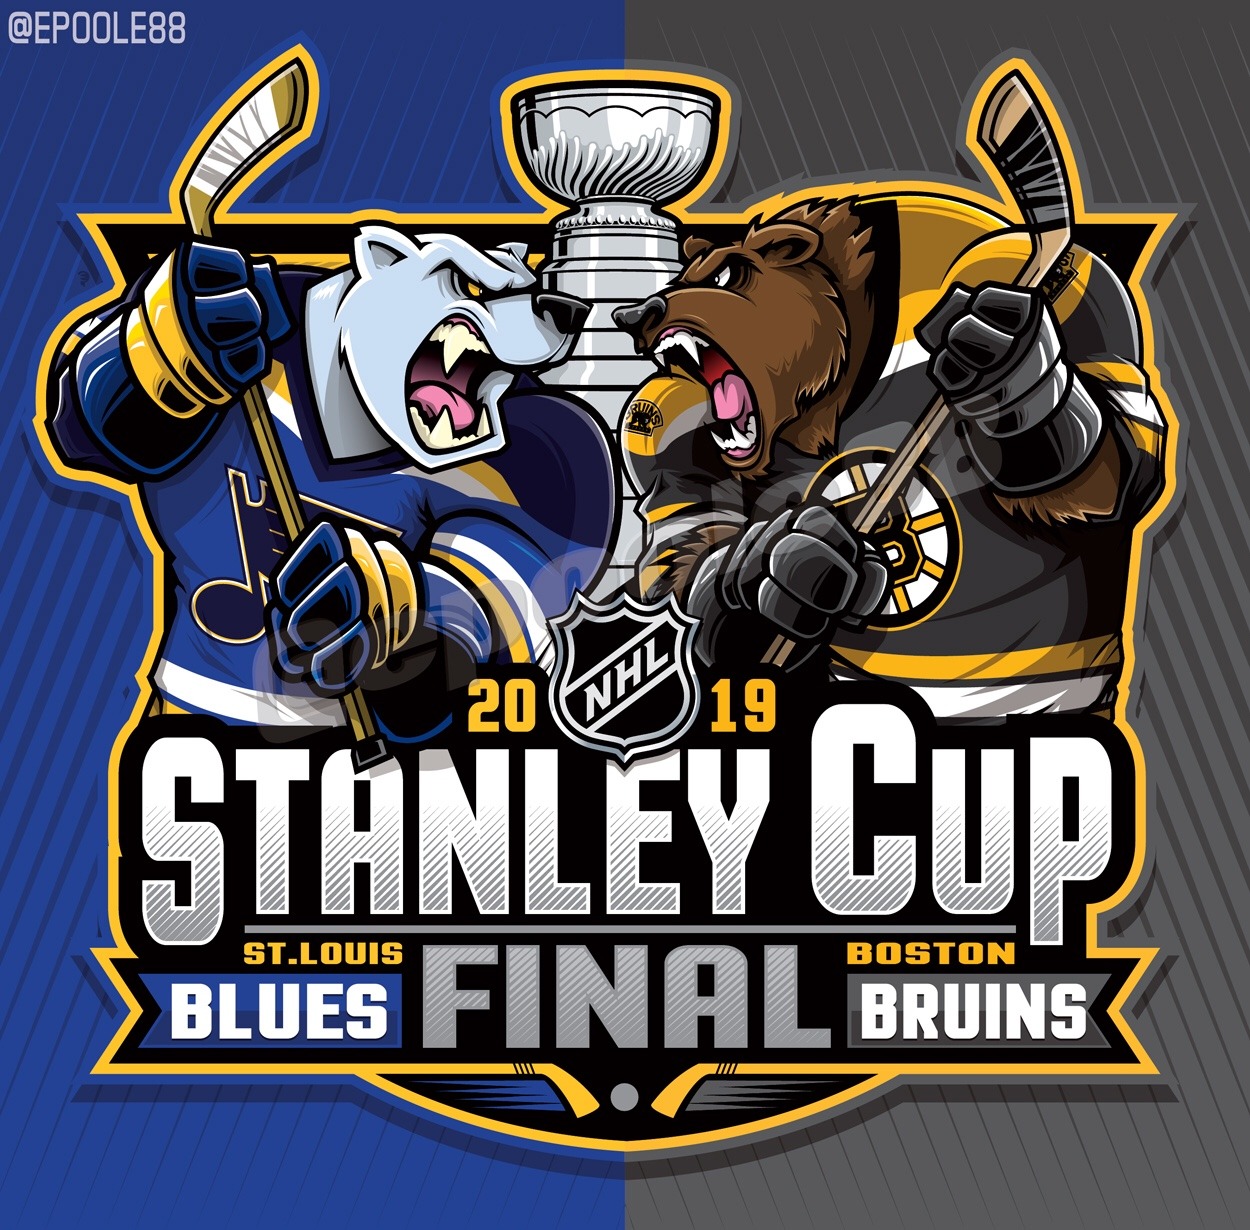 EPoole88 — 2019 Stanley Cup Final